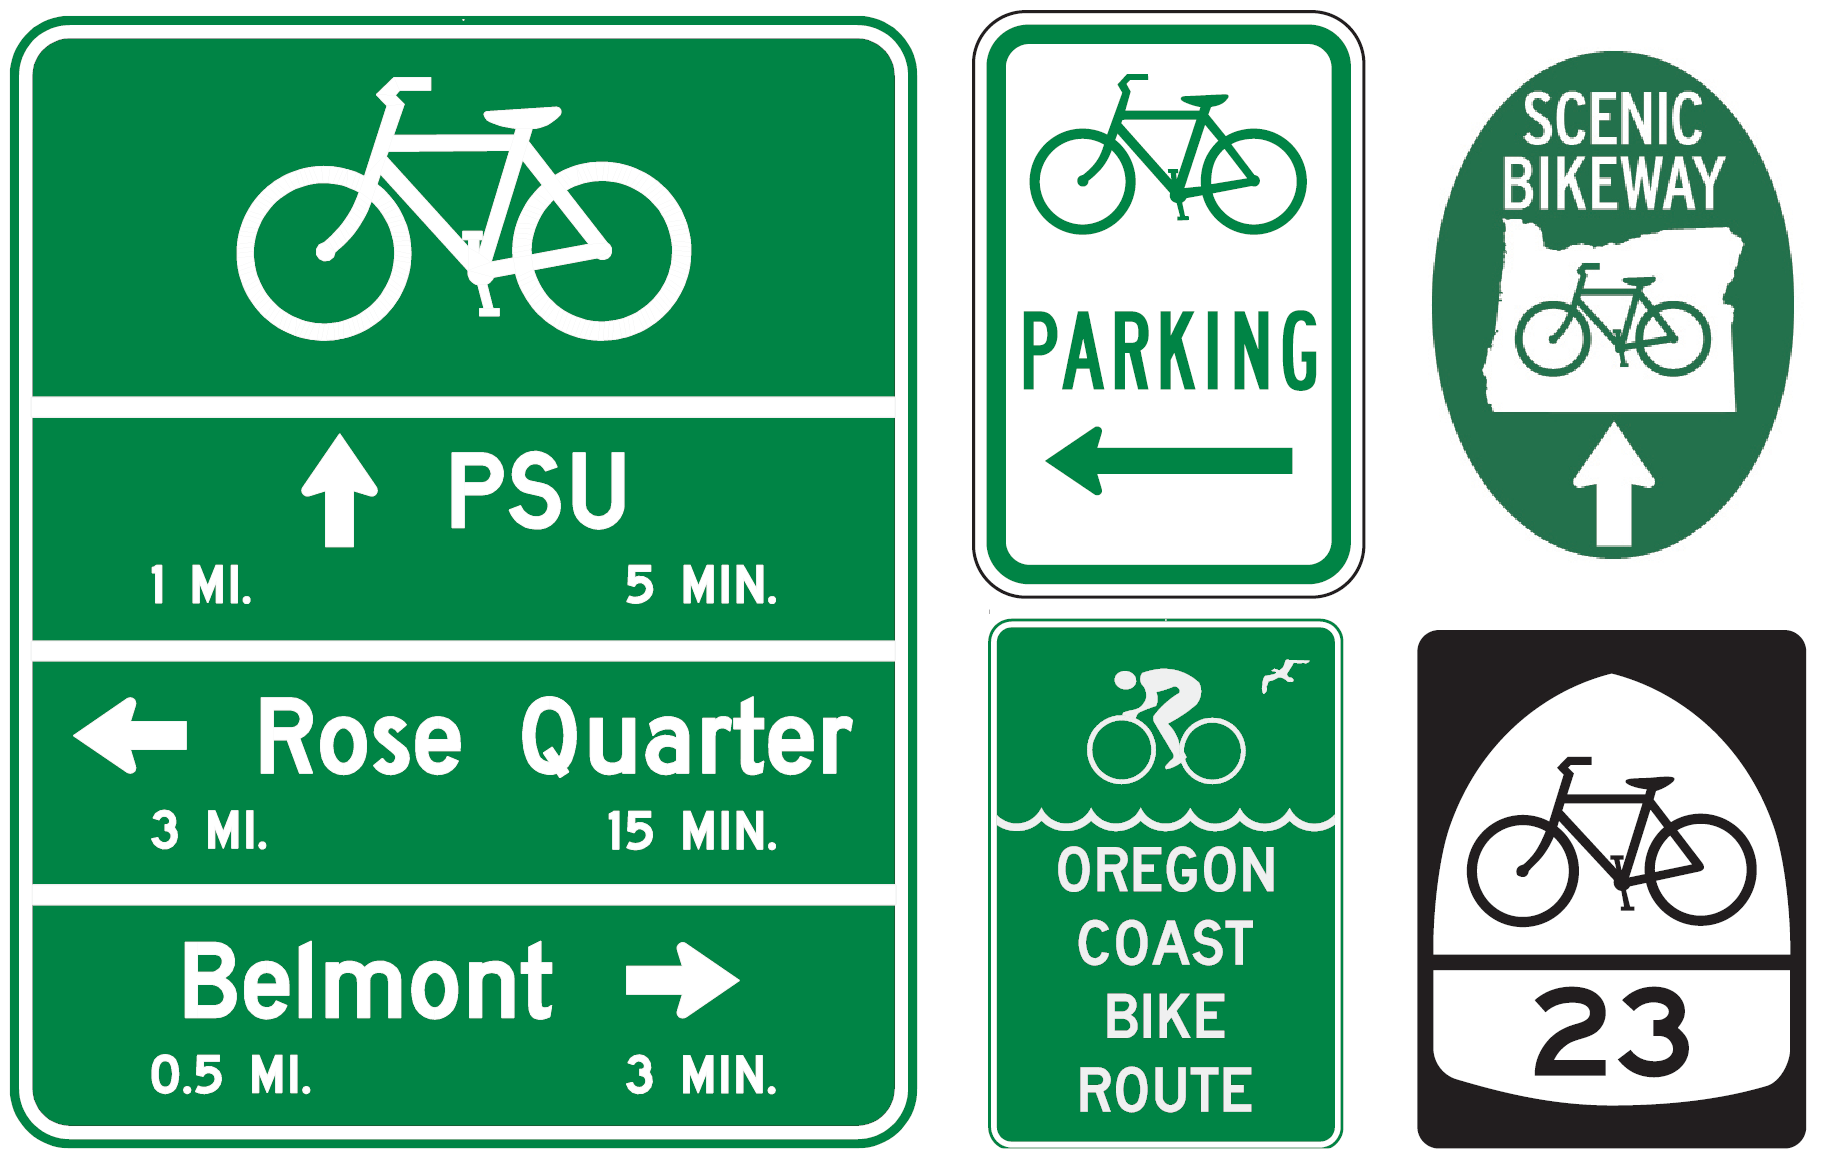 Image - A collage of various bicycle signs as seen throughout Oregon.